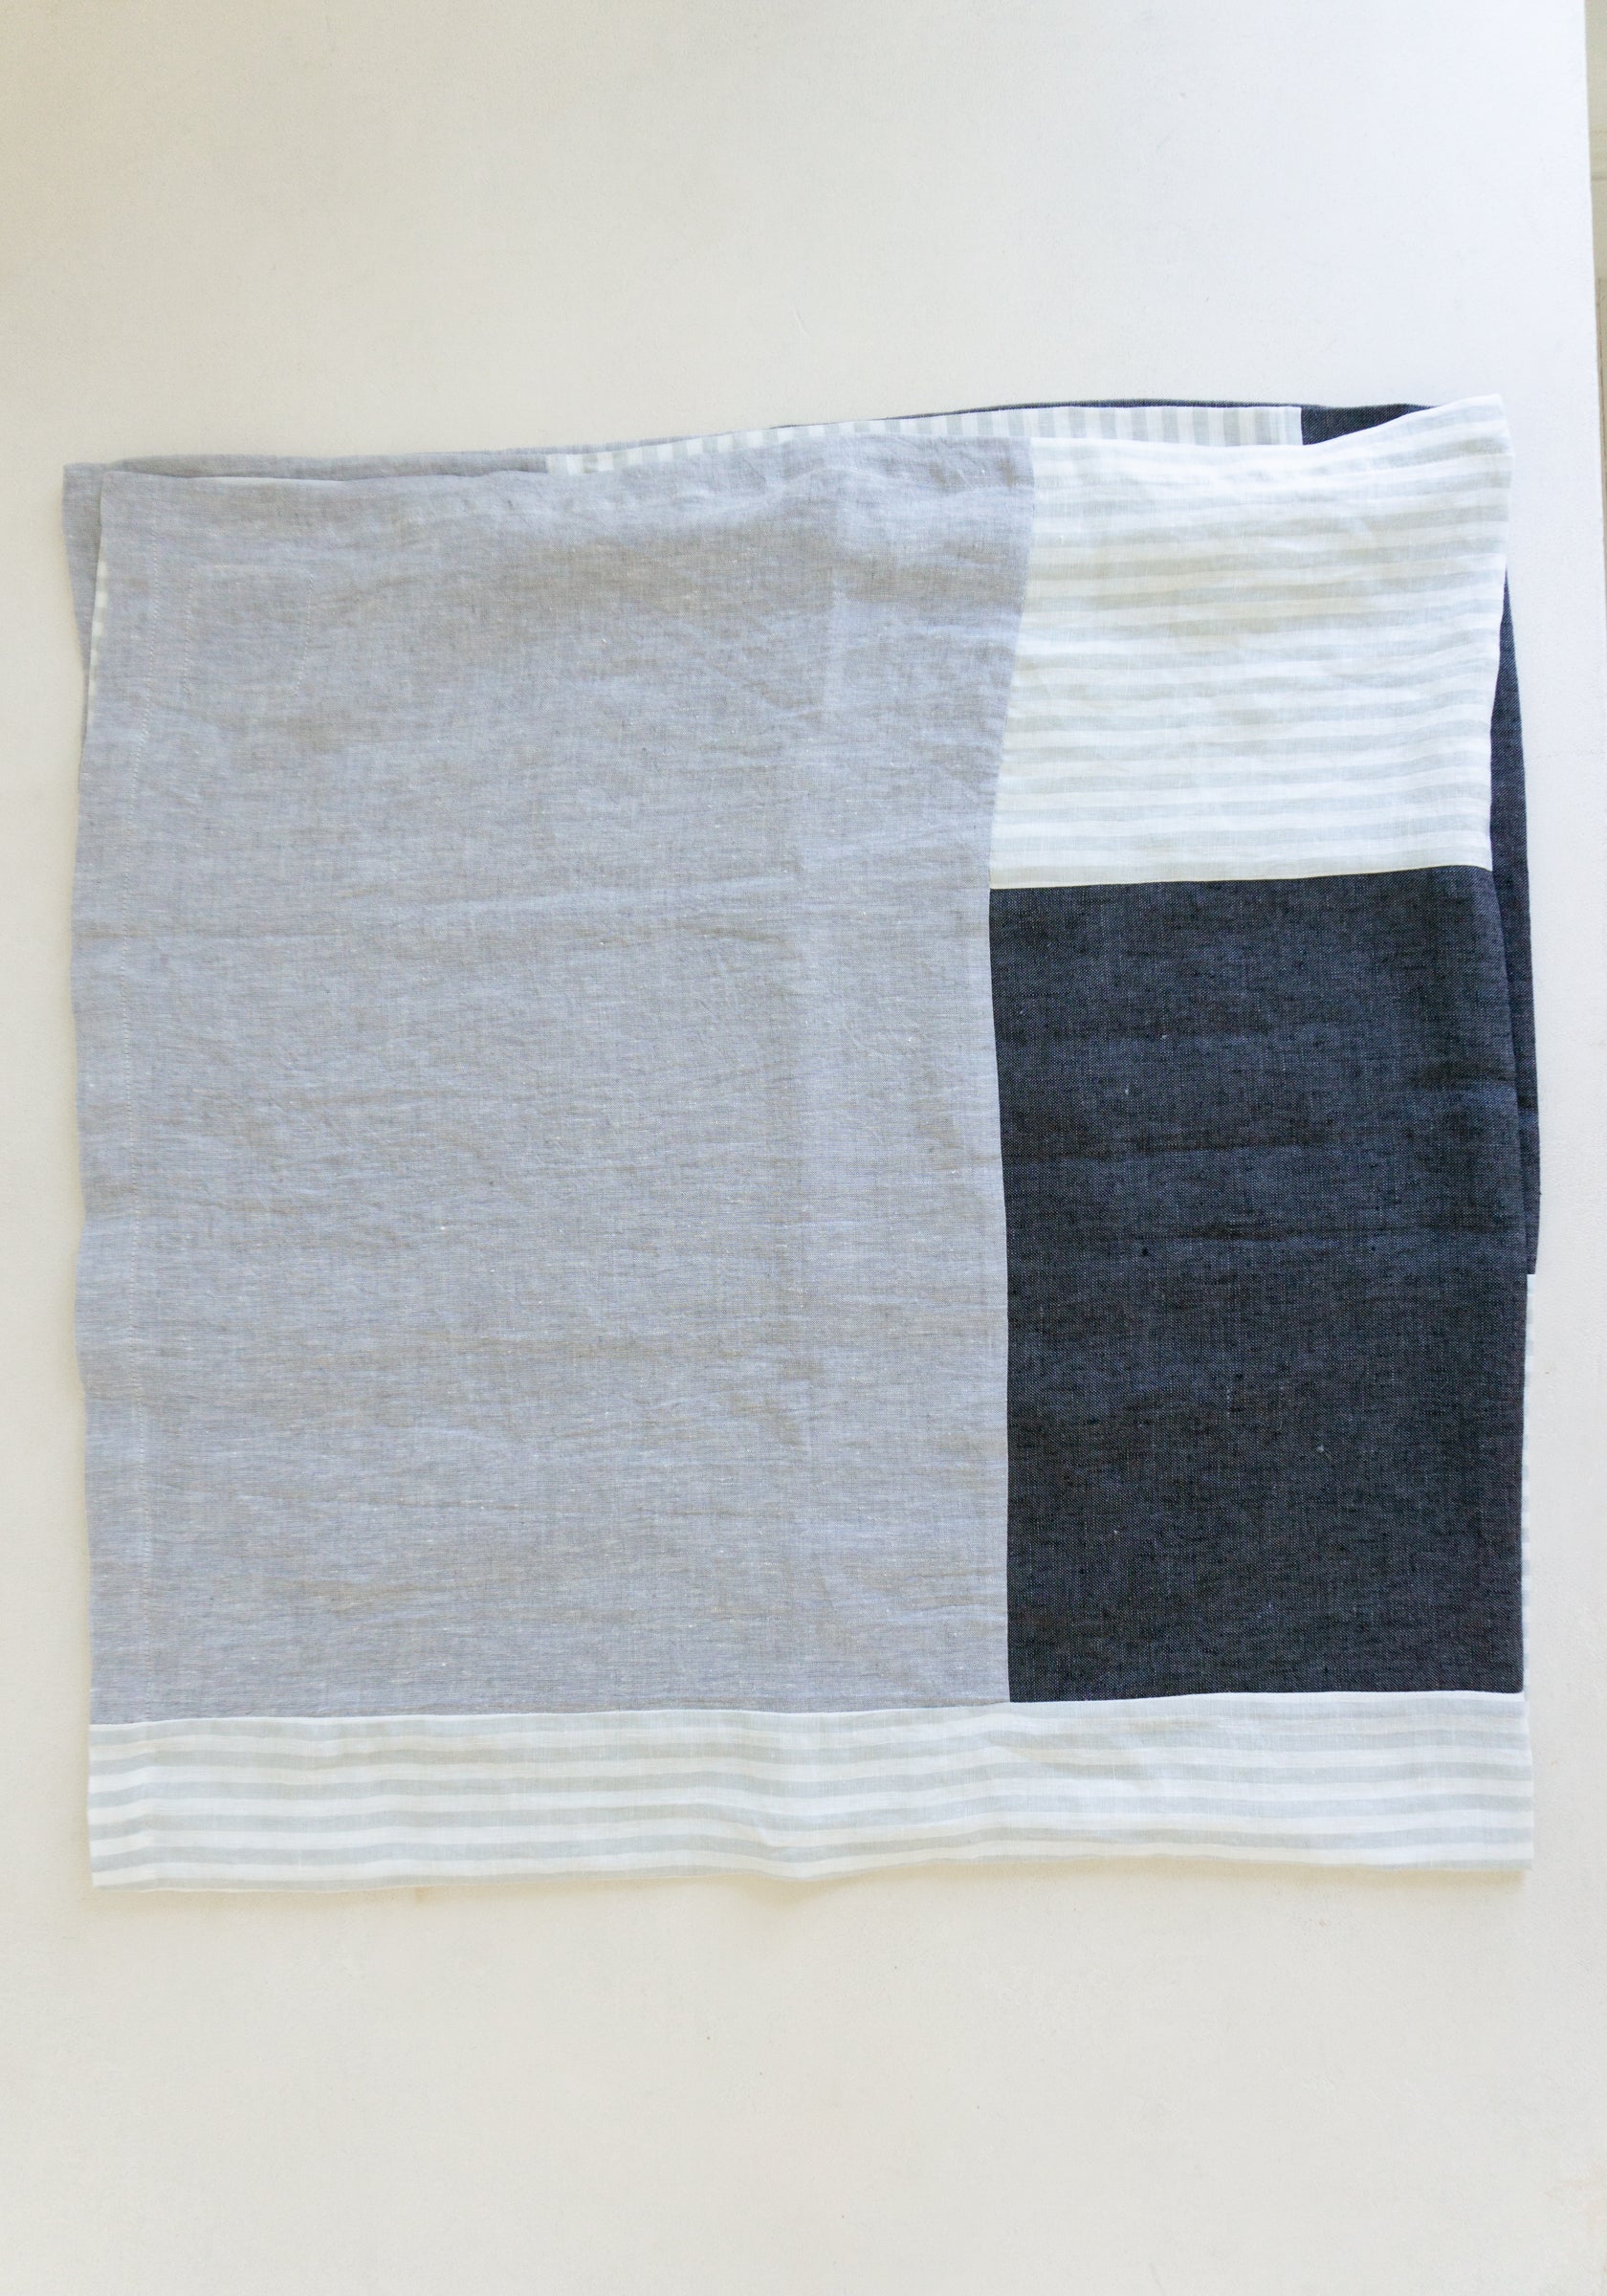 Quilted Linen Textile in Charcoal and Stripes